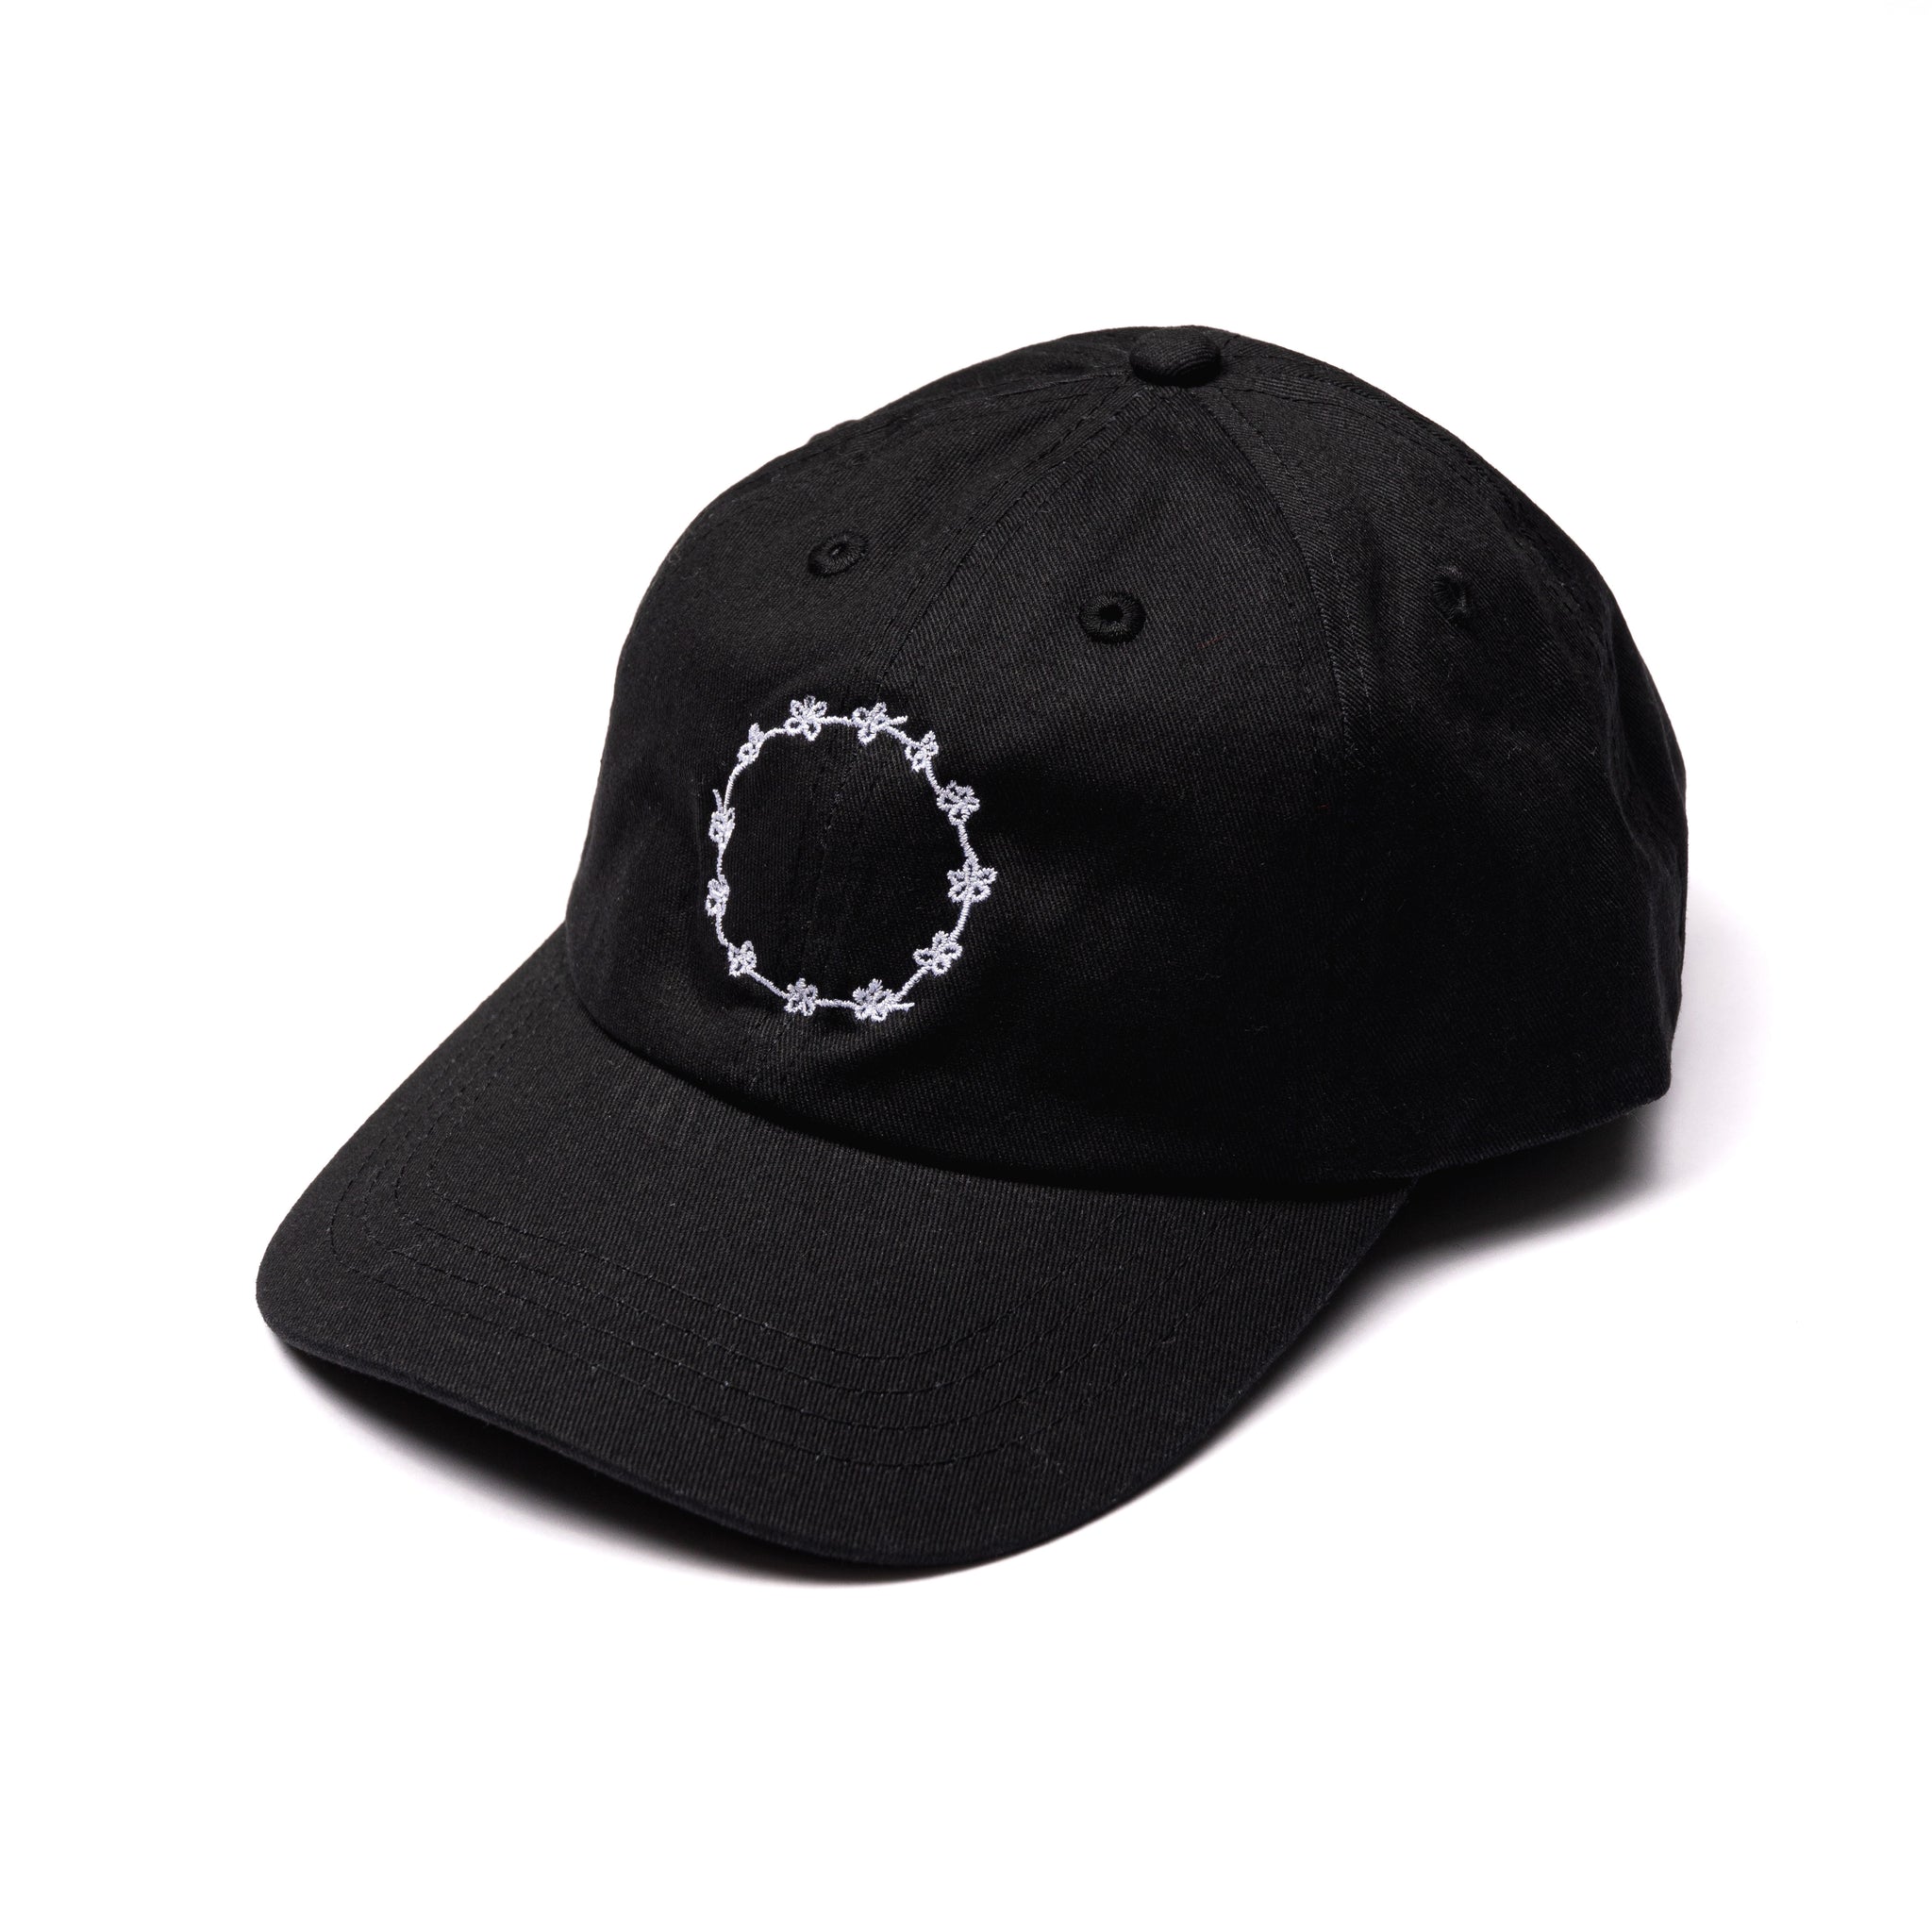 The Holy Seppele Cap